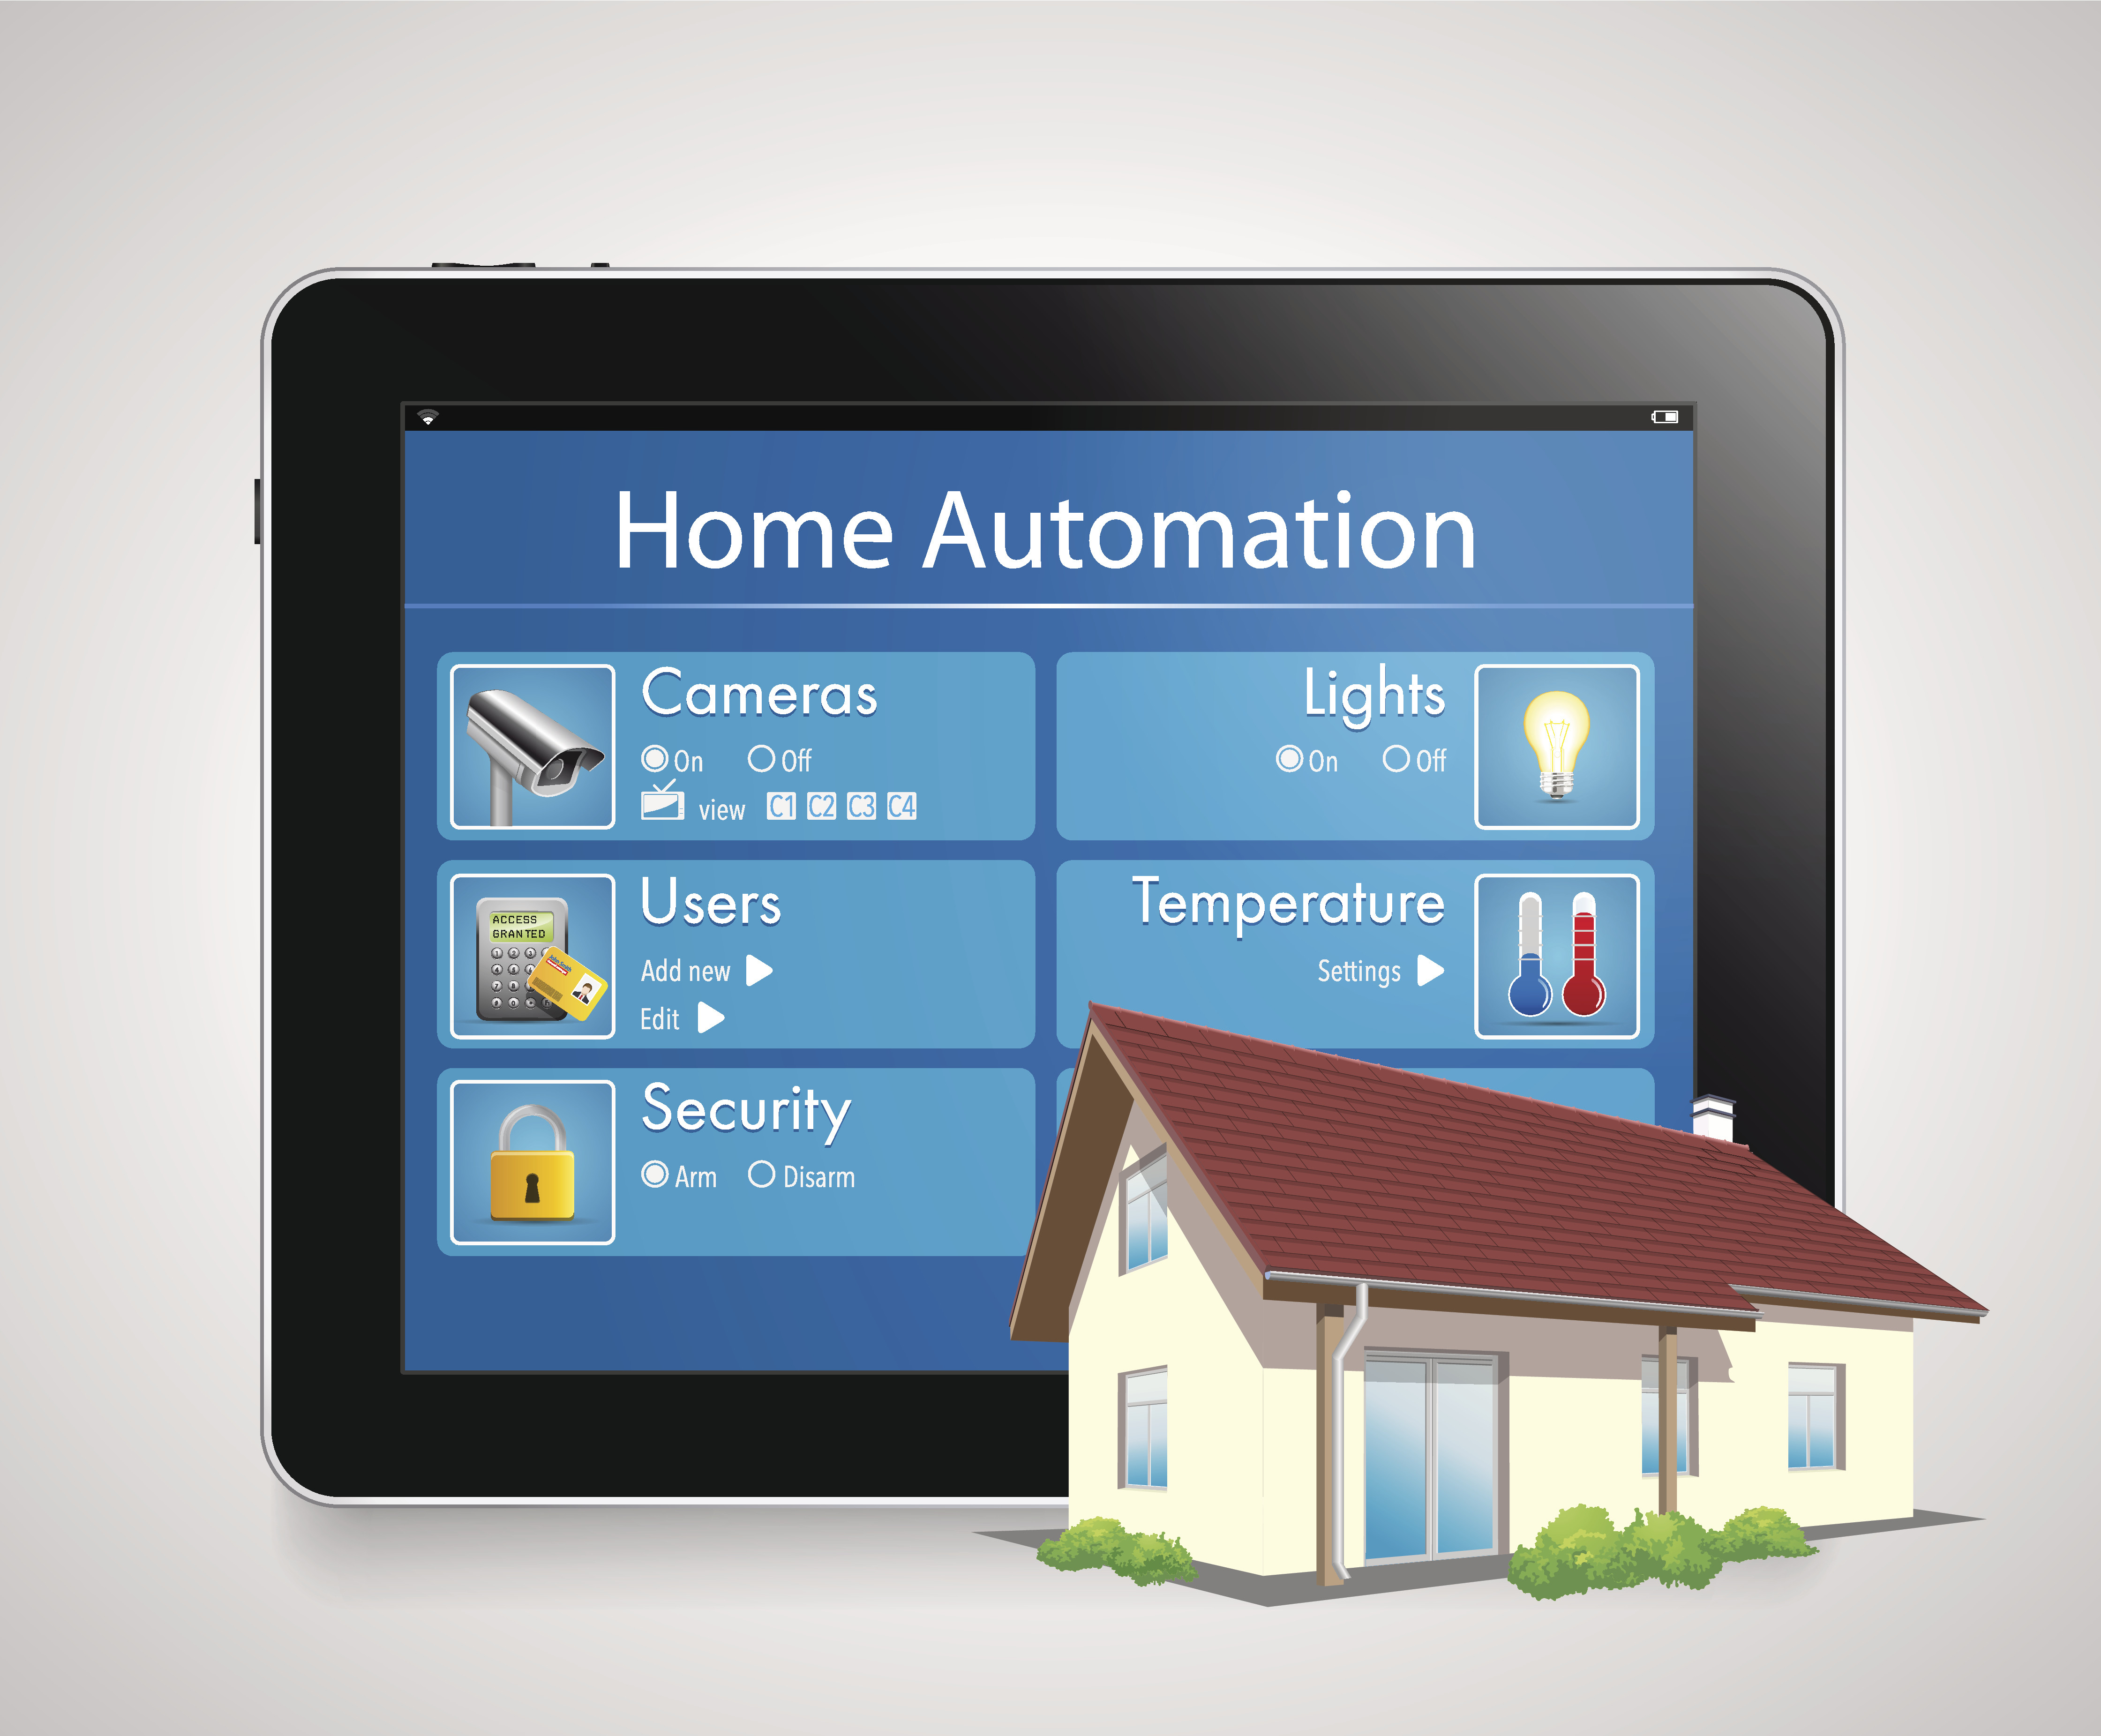 DIY Home Automation System
 A prehensive Guide For Do It Yourself Home Automation